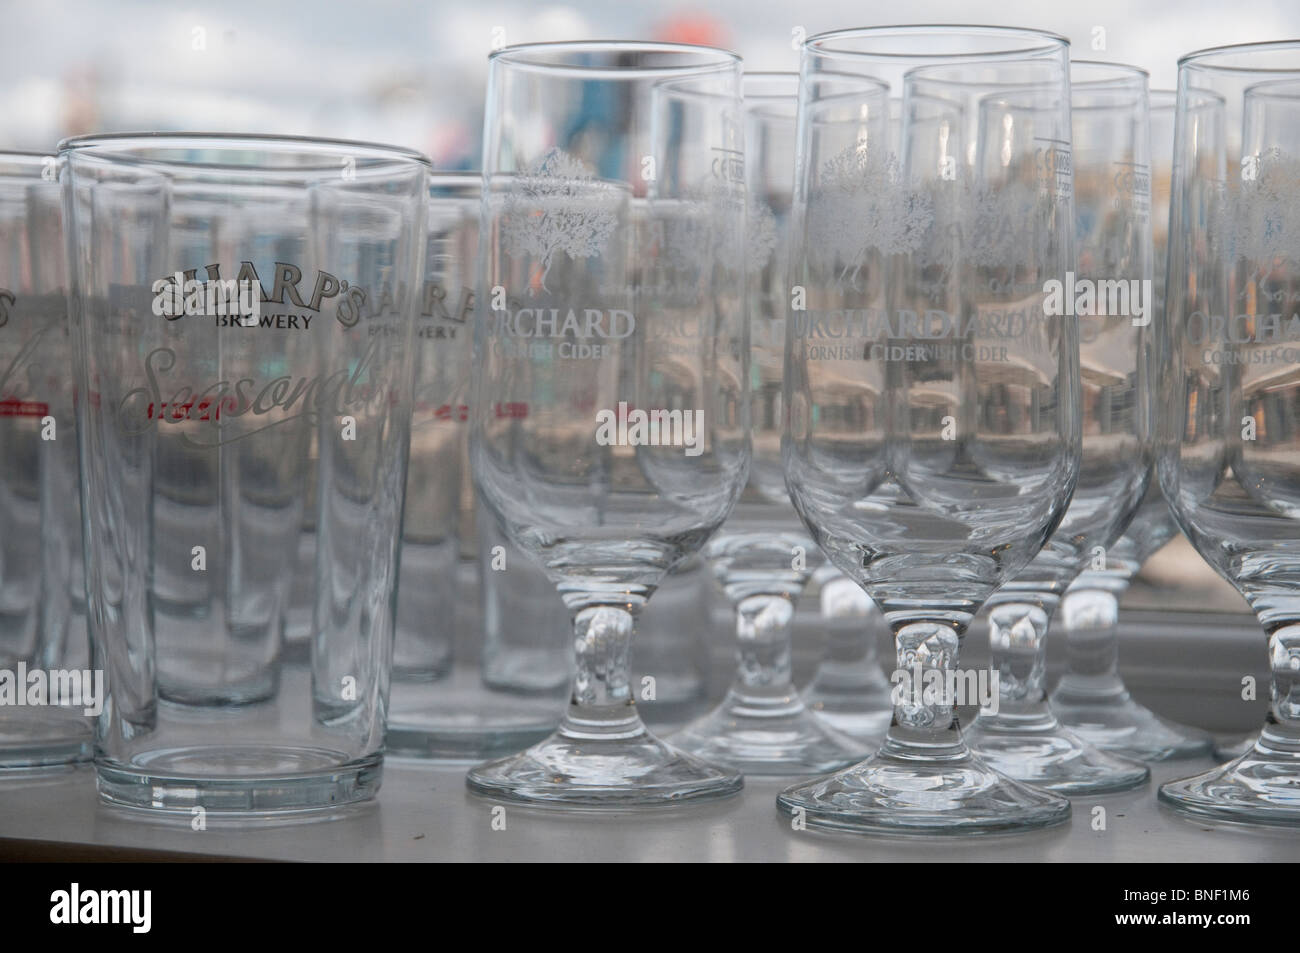 Branded glassware in the Sharp's Brewery shop, Rock, Cornwall. Stock Photo